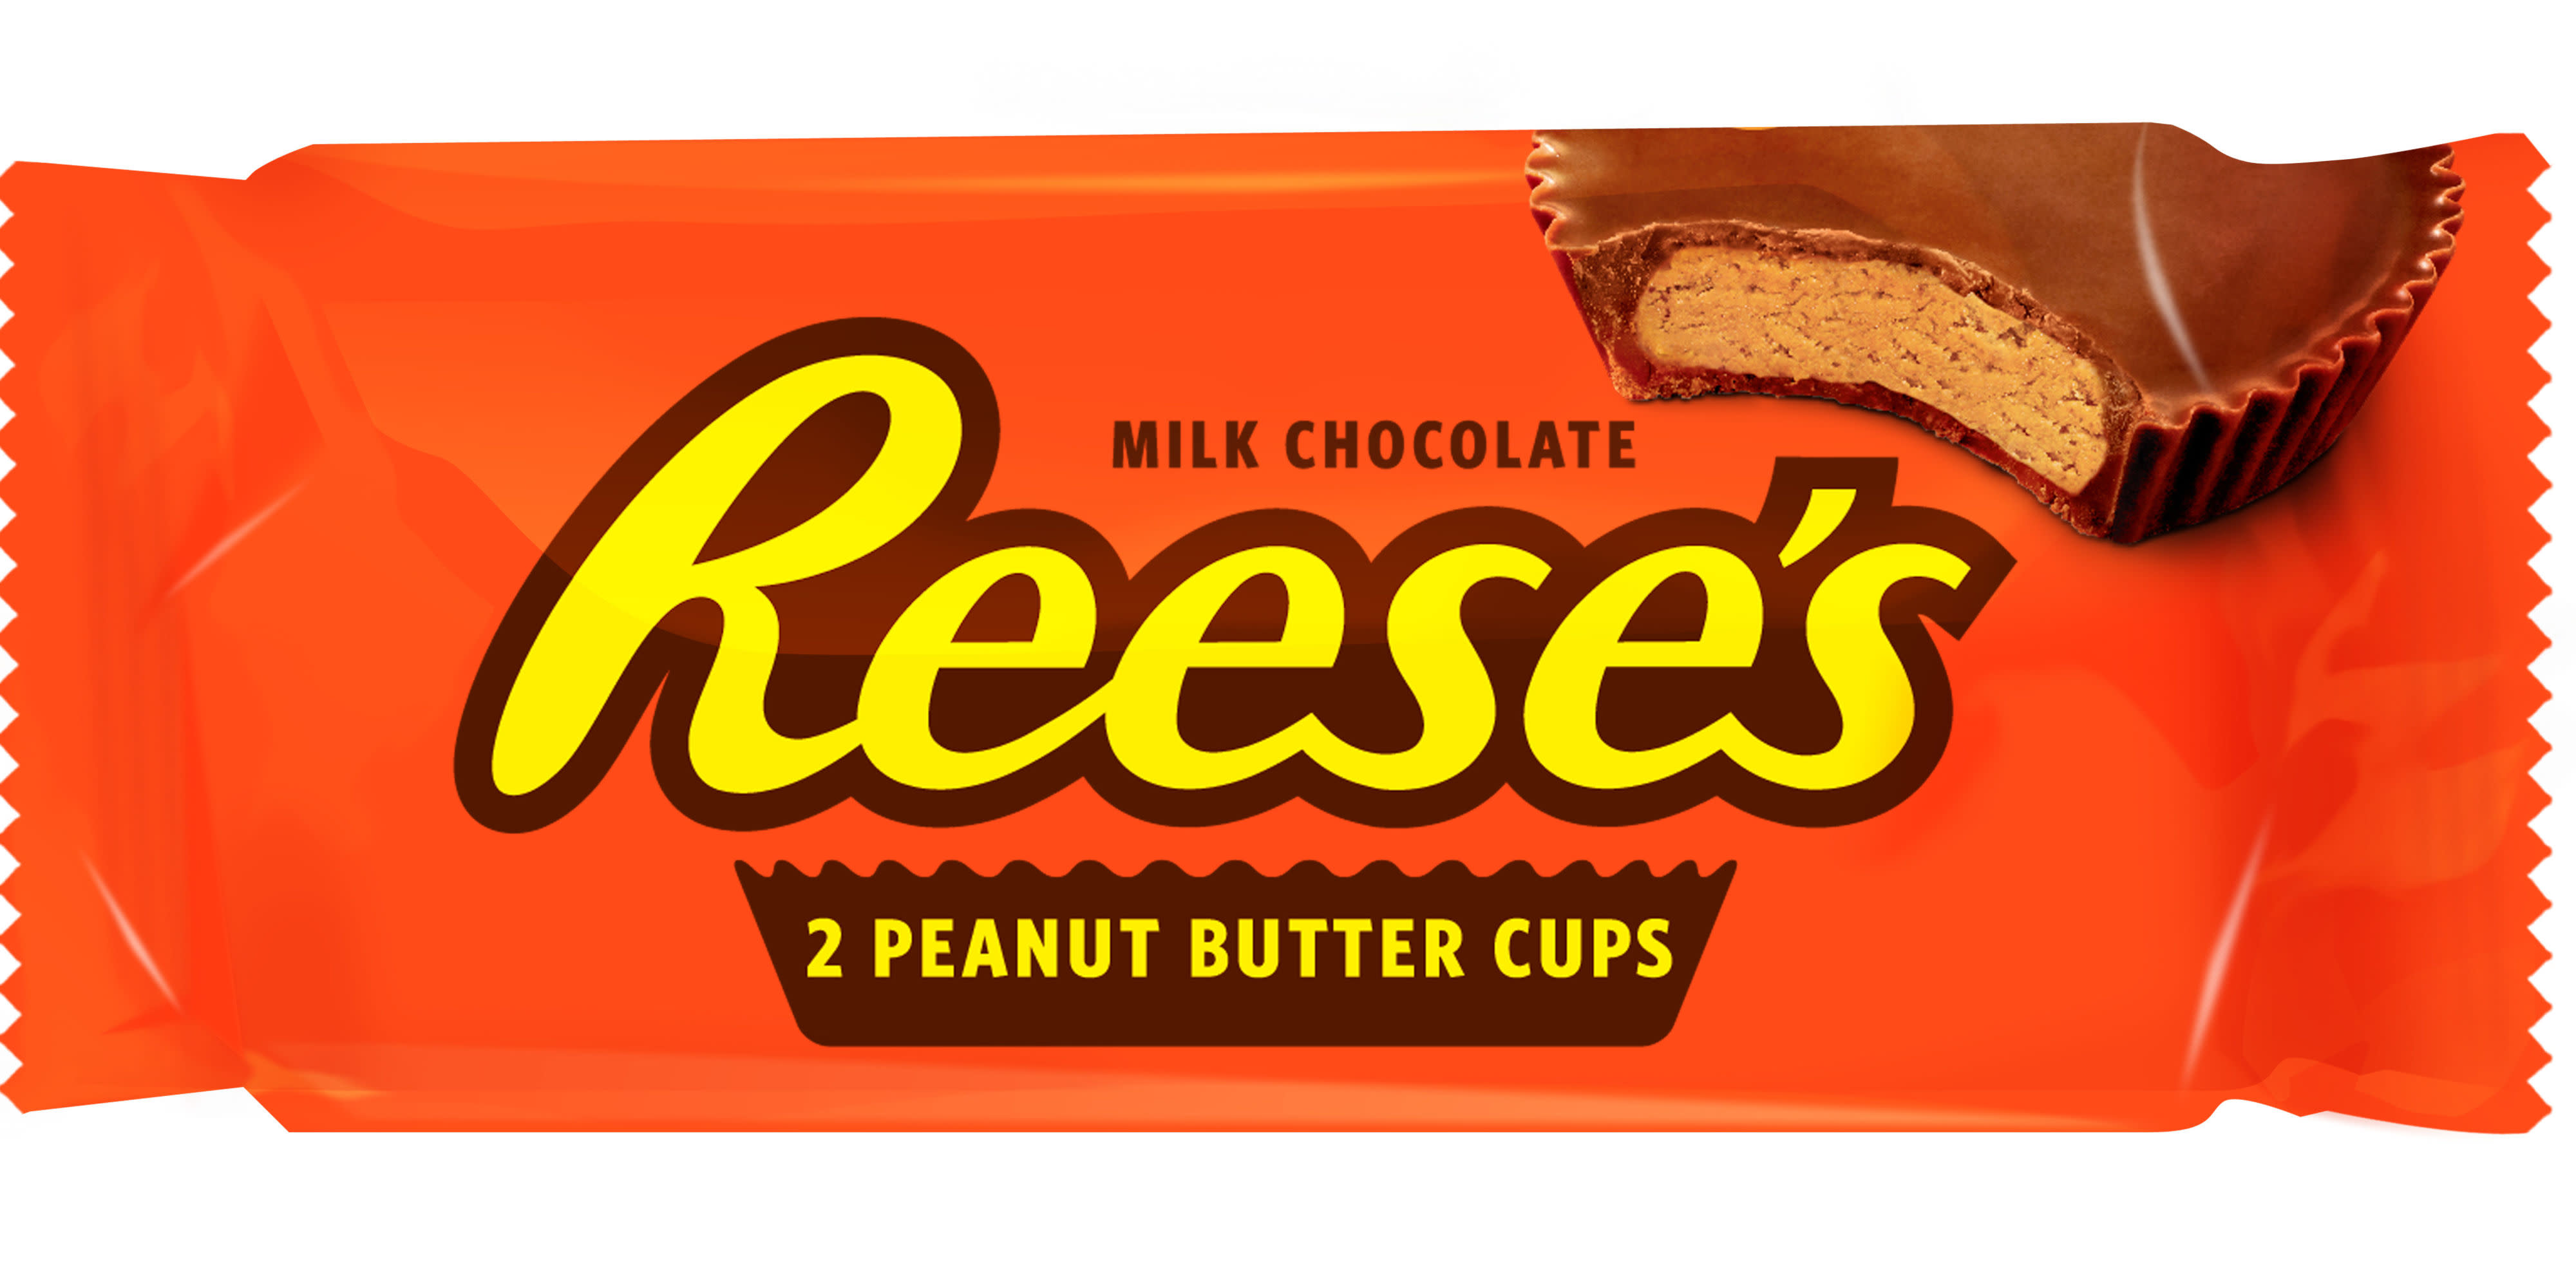 7 Things You Need To Know Before Eating Reese's Peanut Butter Cups